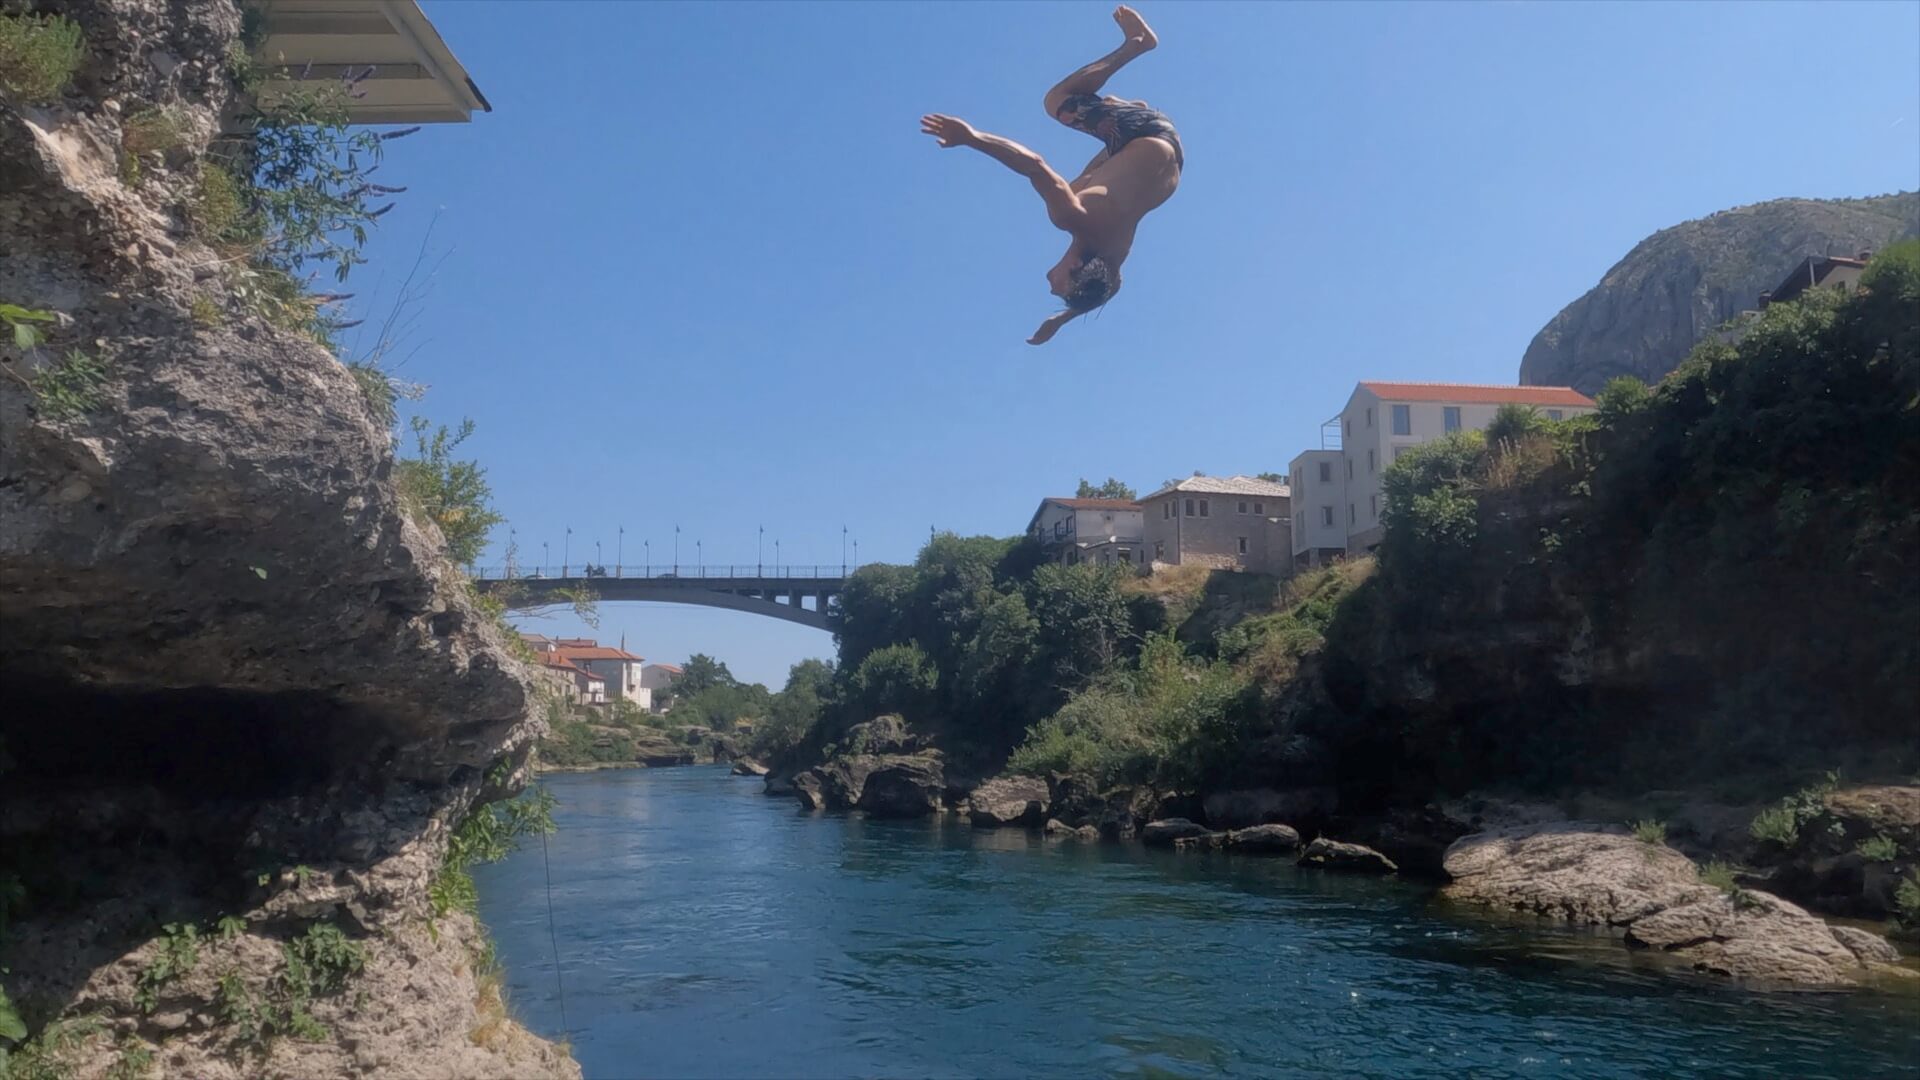 Jumping off a platform into the river in Mostar